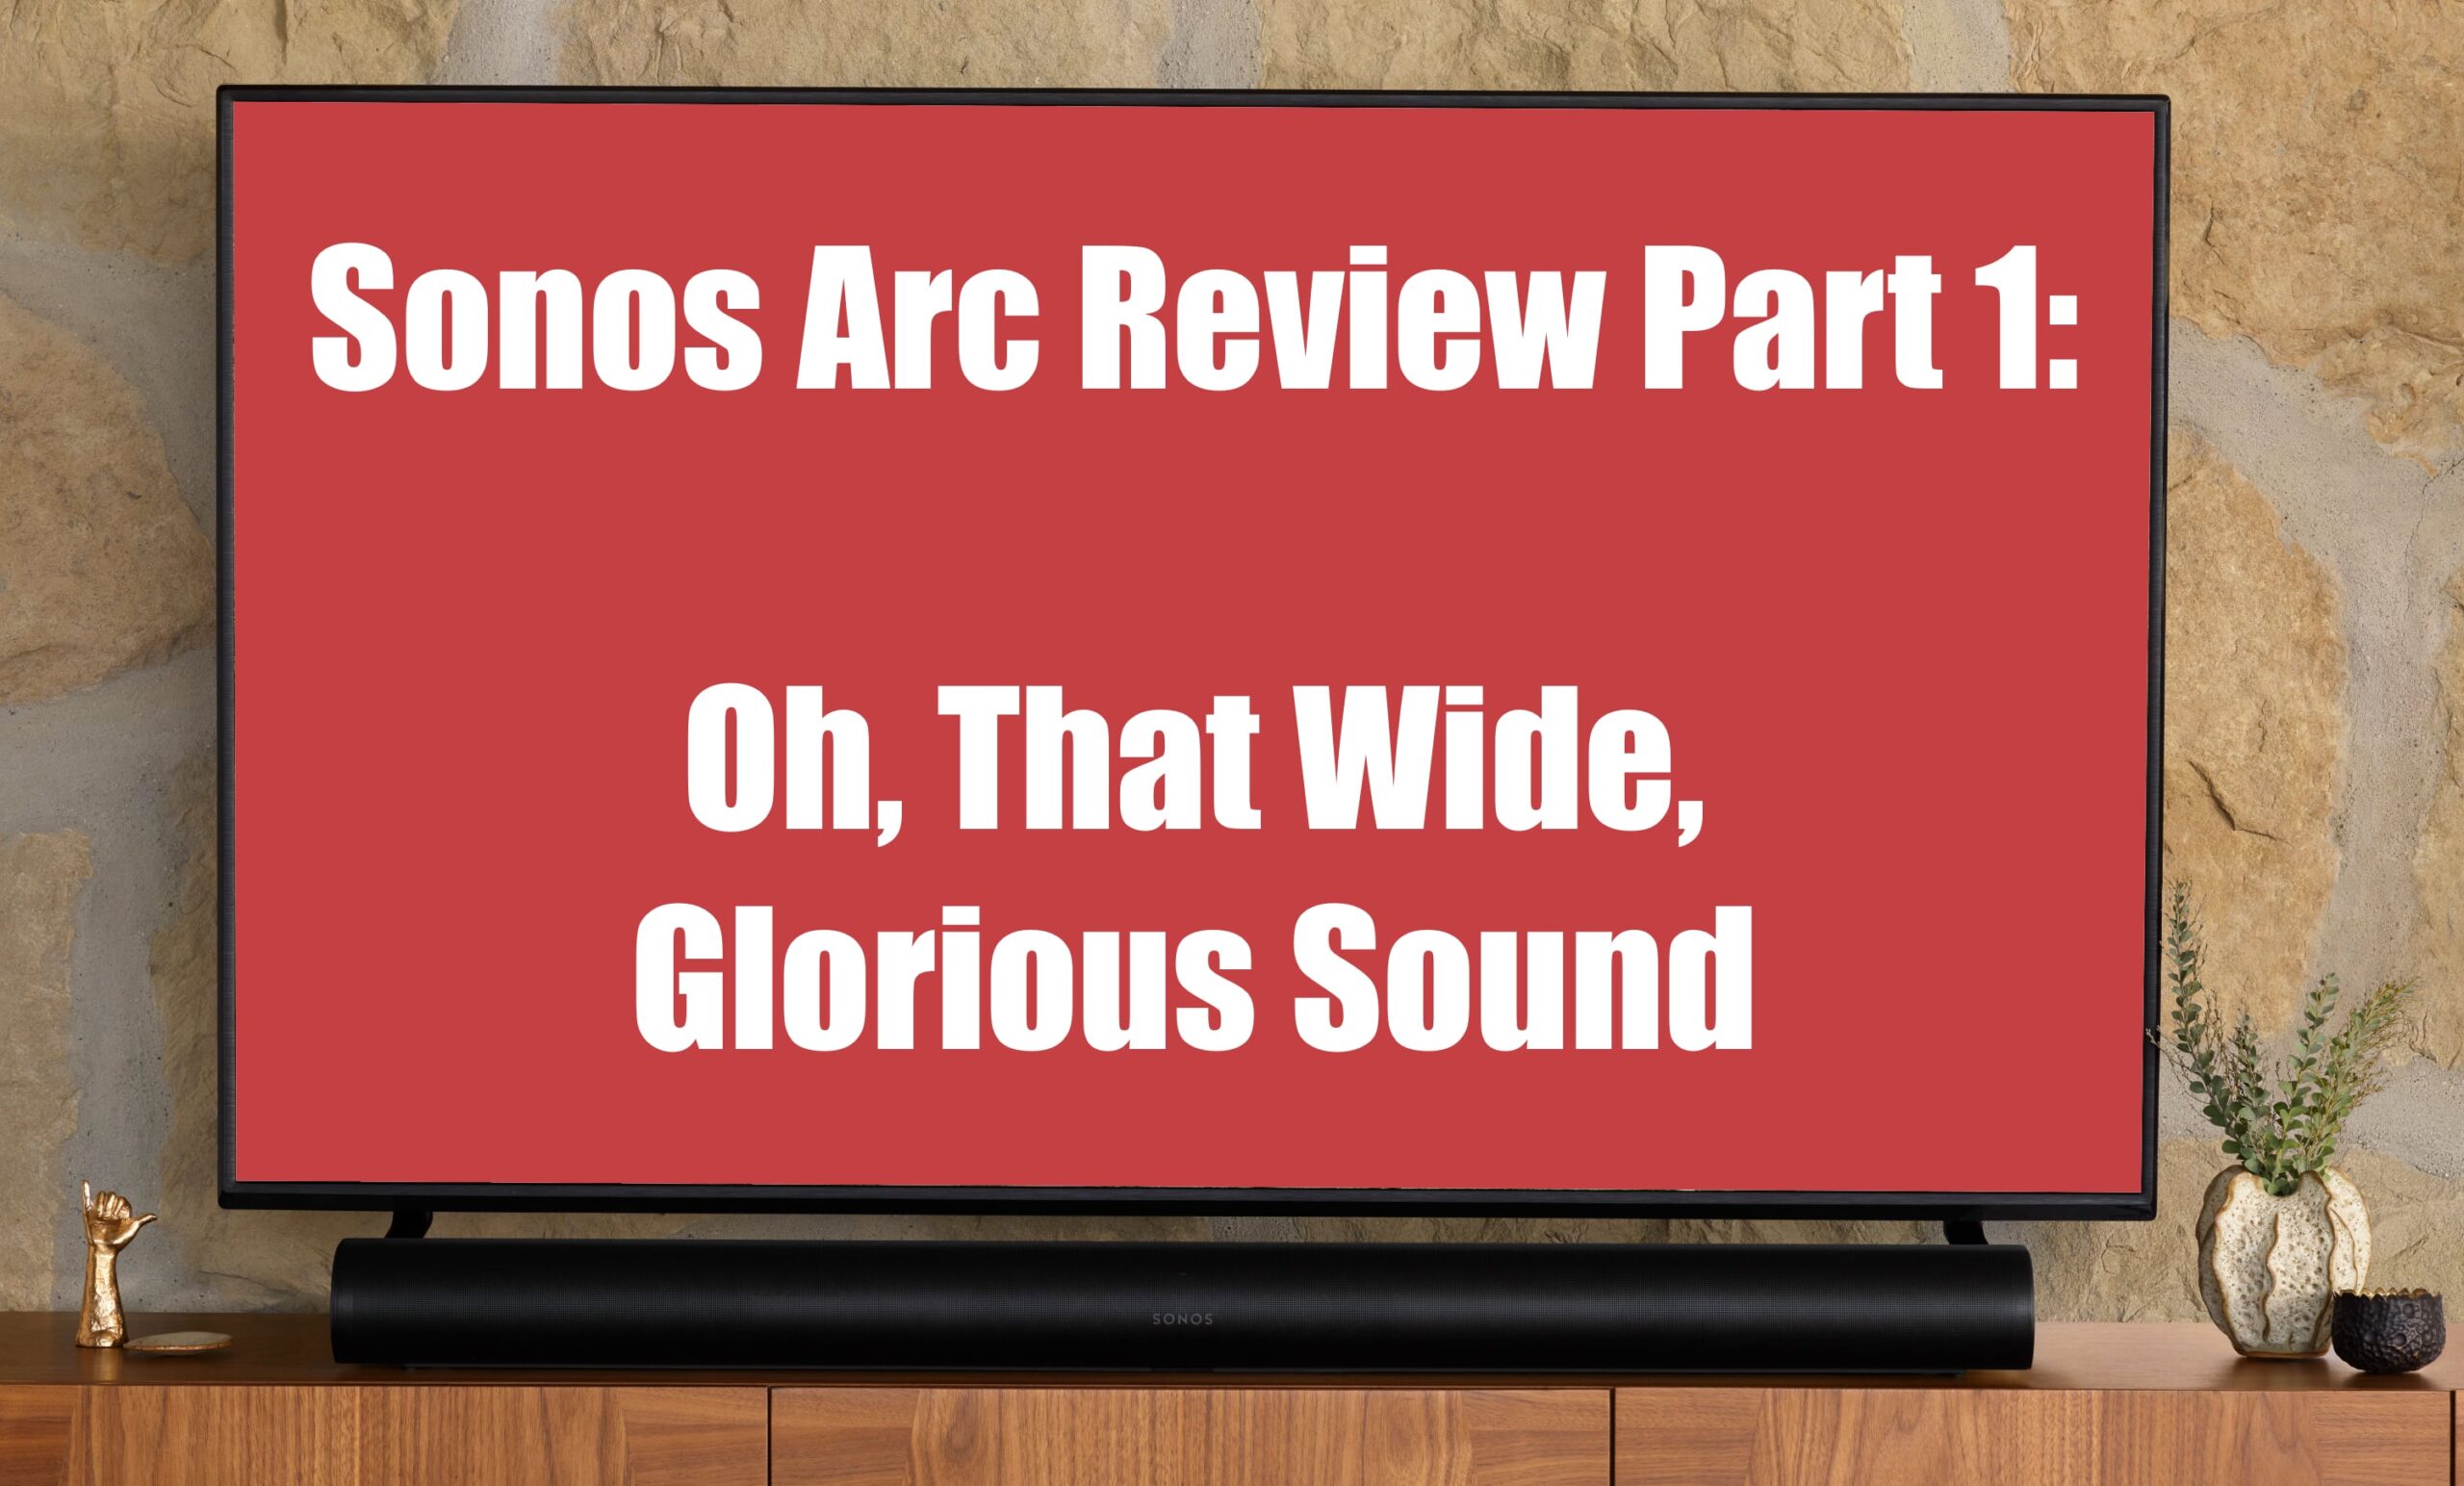 Sonos Arc below TV with Text: Sonos Arc Review Part 1 Oh That Wide Glorious Sound